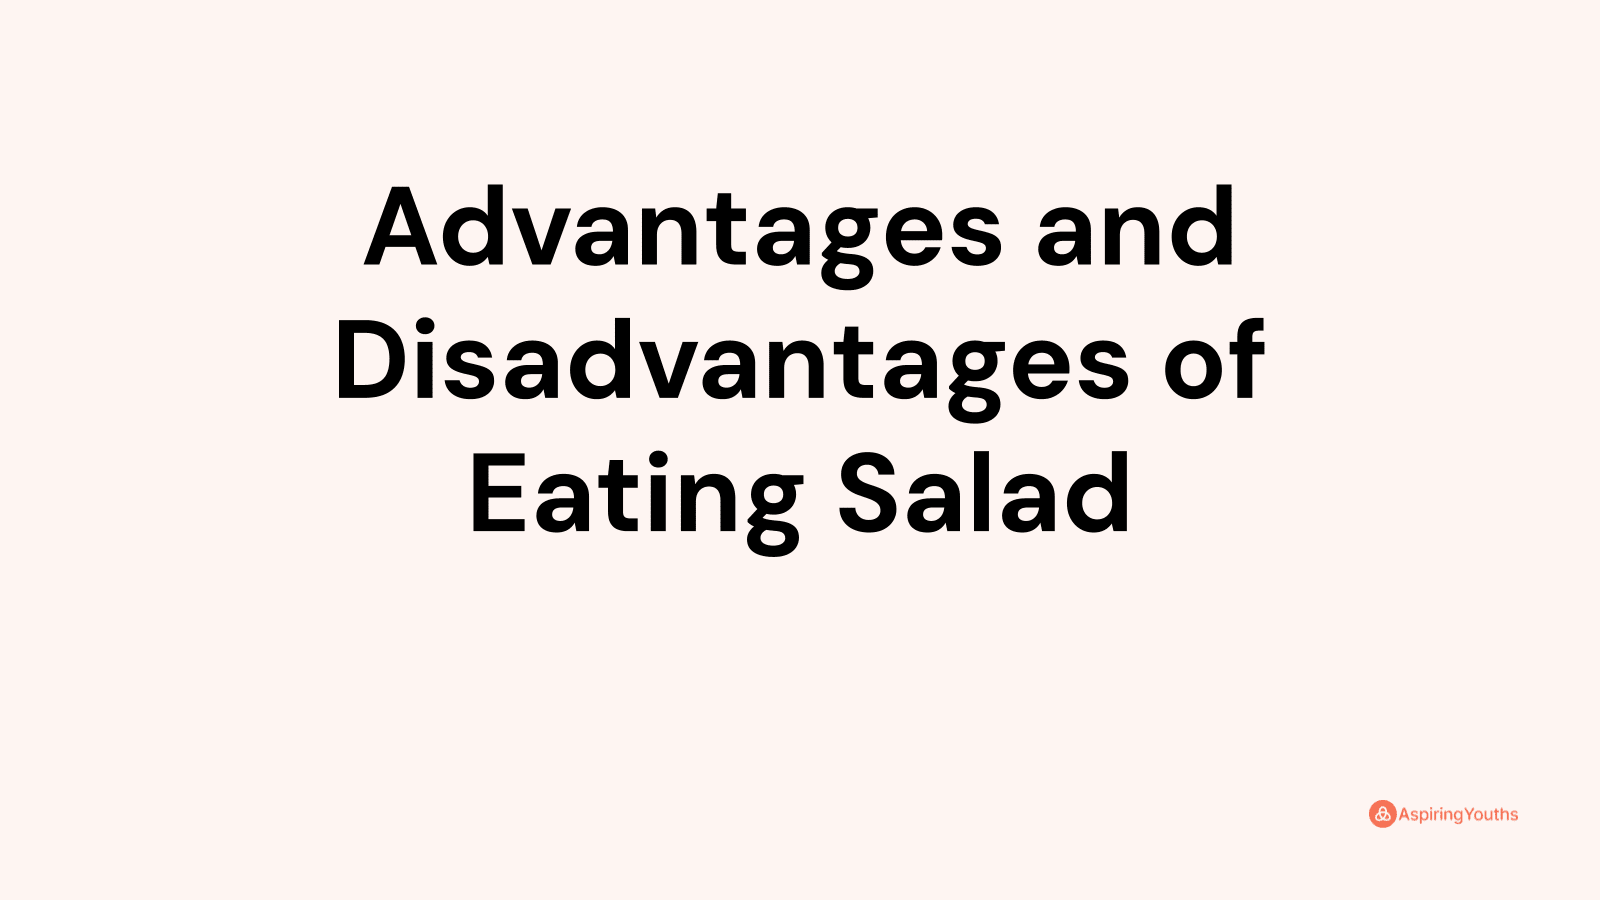 Advantages and disadvantages of Eating Salad